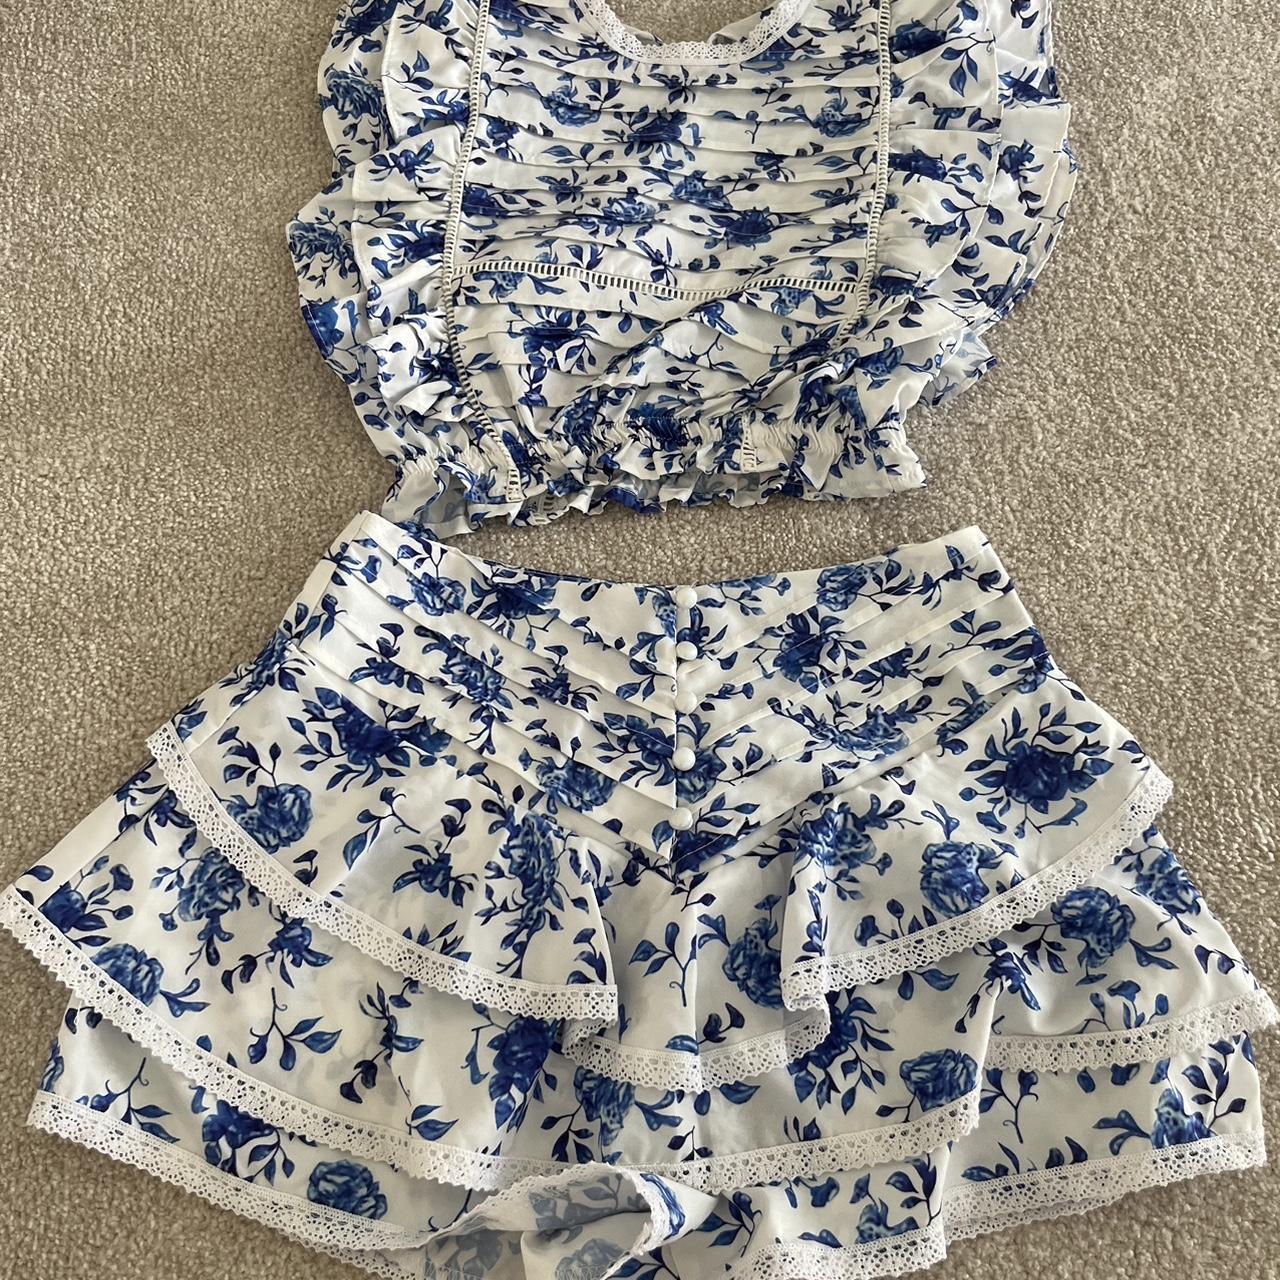 Women's Blue and White Shorts | Depop